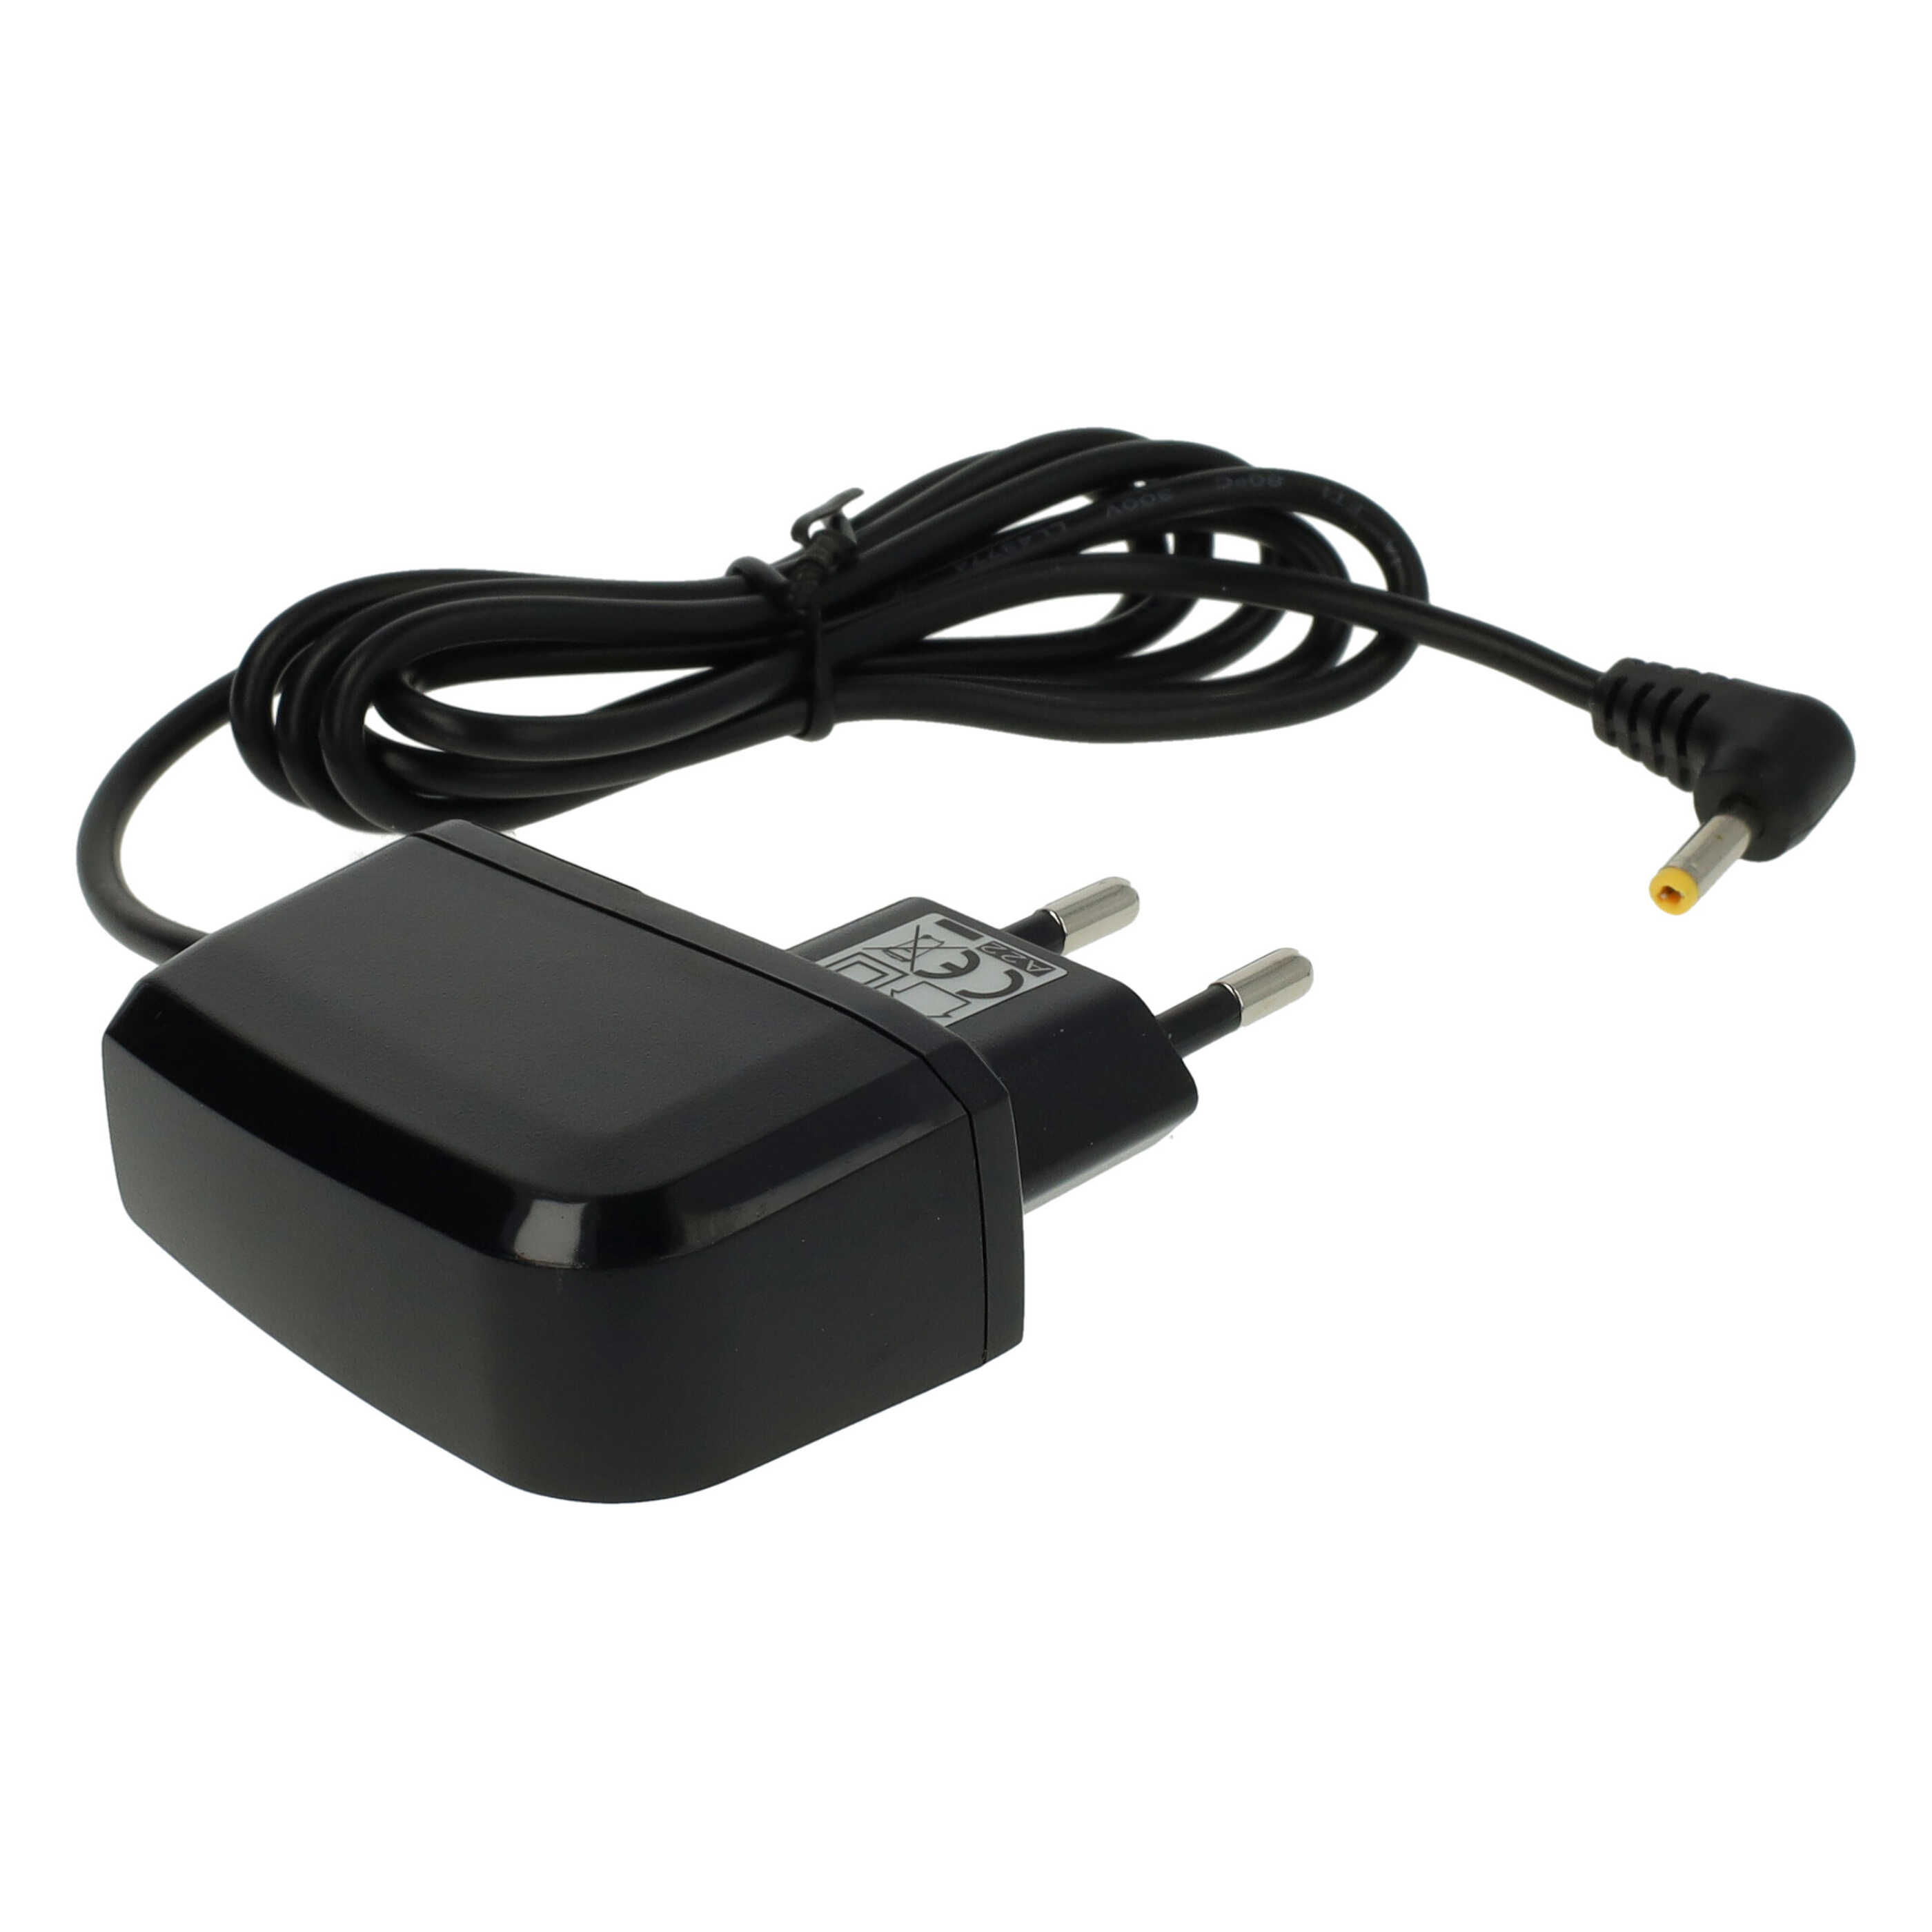 Charger suitable for e310 ToshibaNavigation Device etc. - 2.0 A